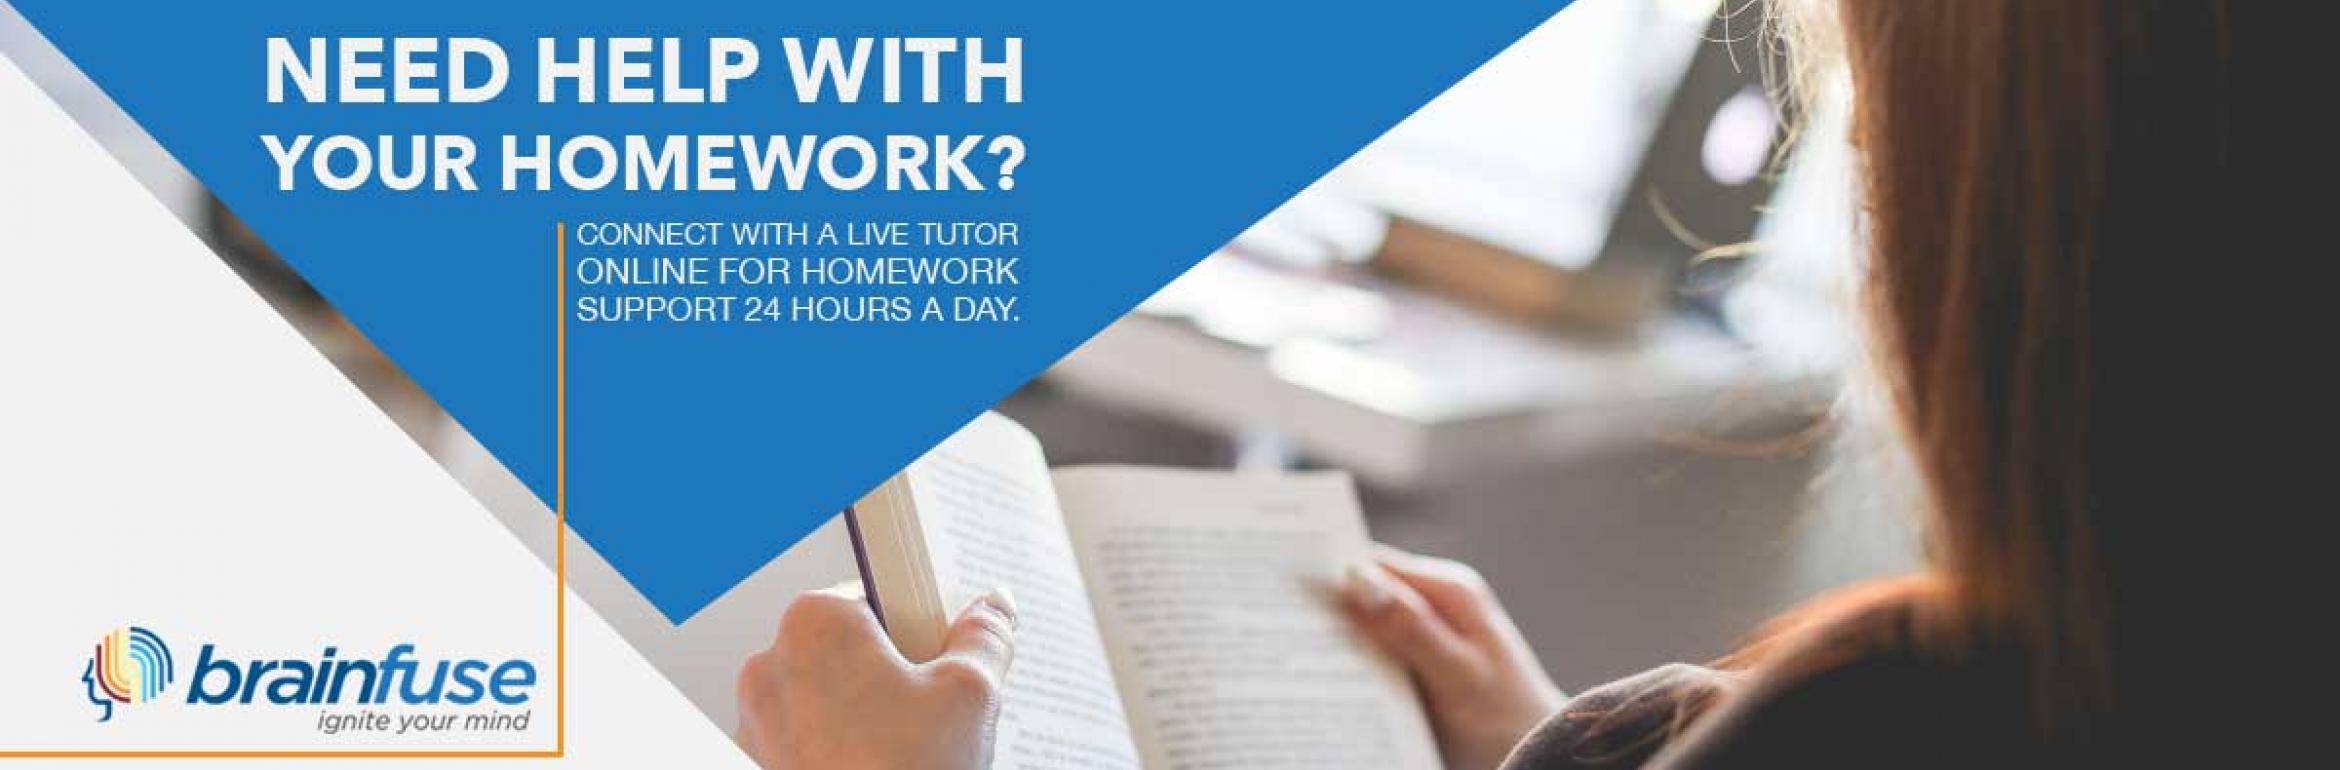 Brainfuse: Need help with your homework? Connect with a live tutor online for homework support 24 hours a day.